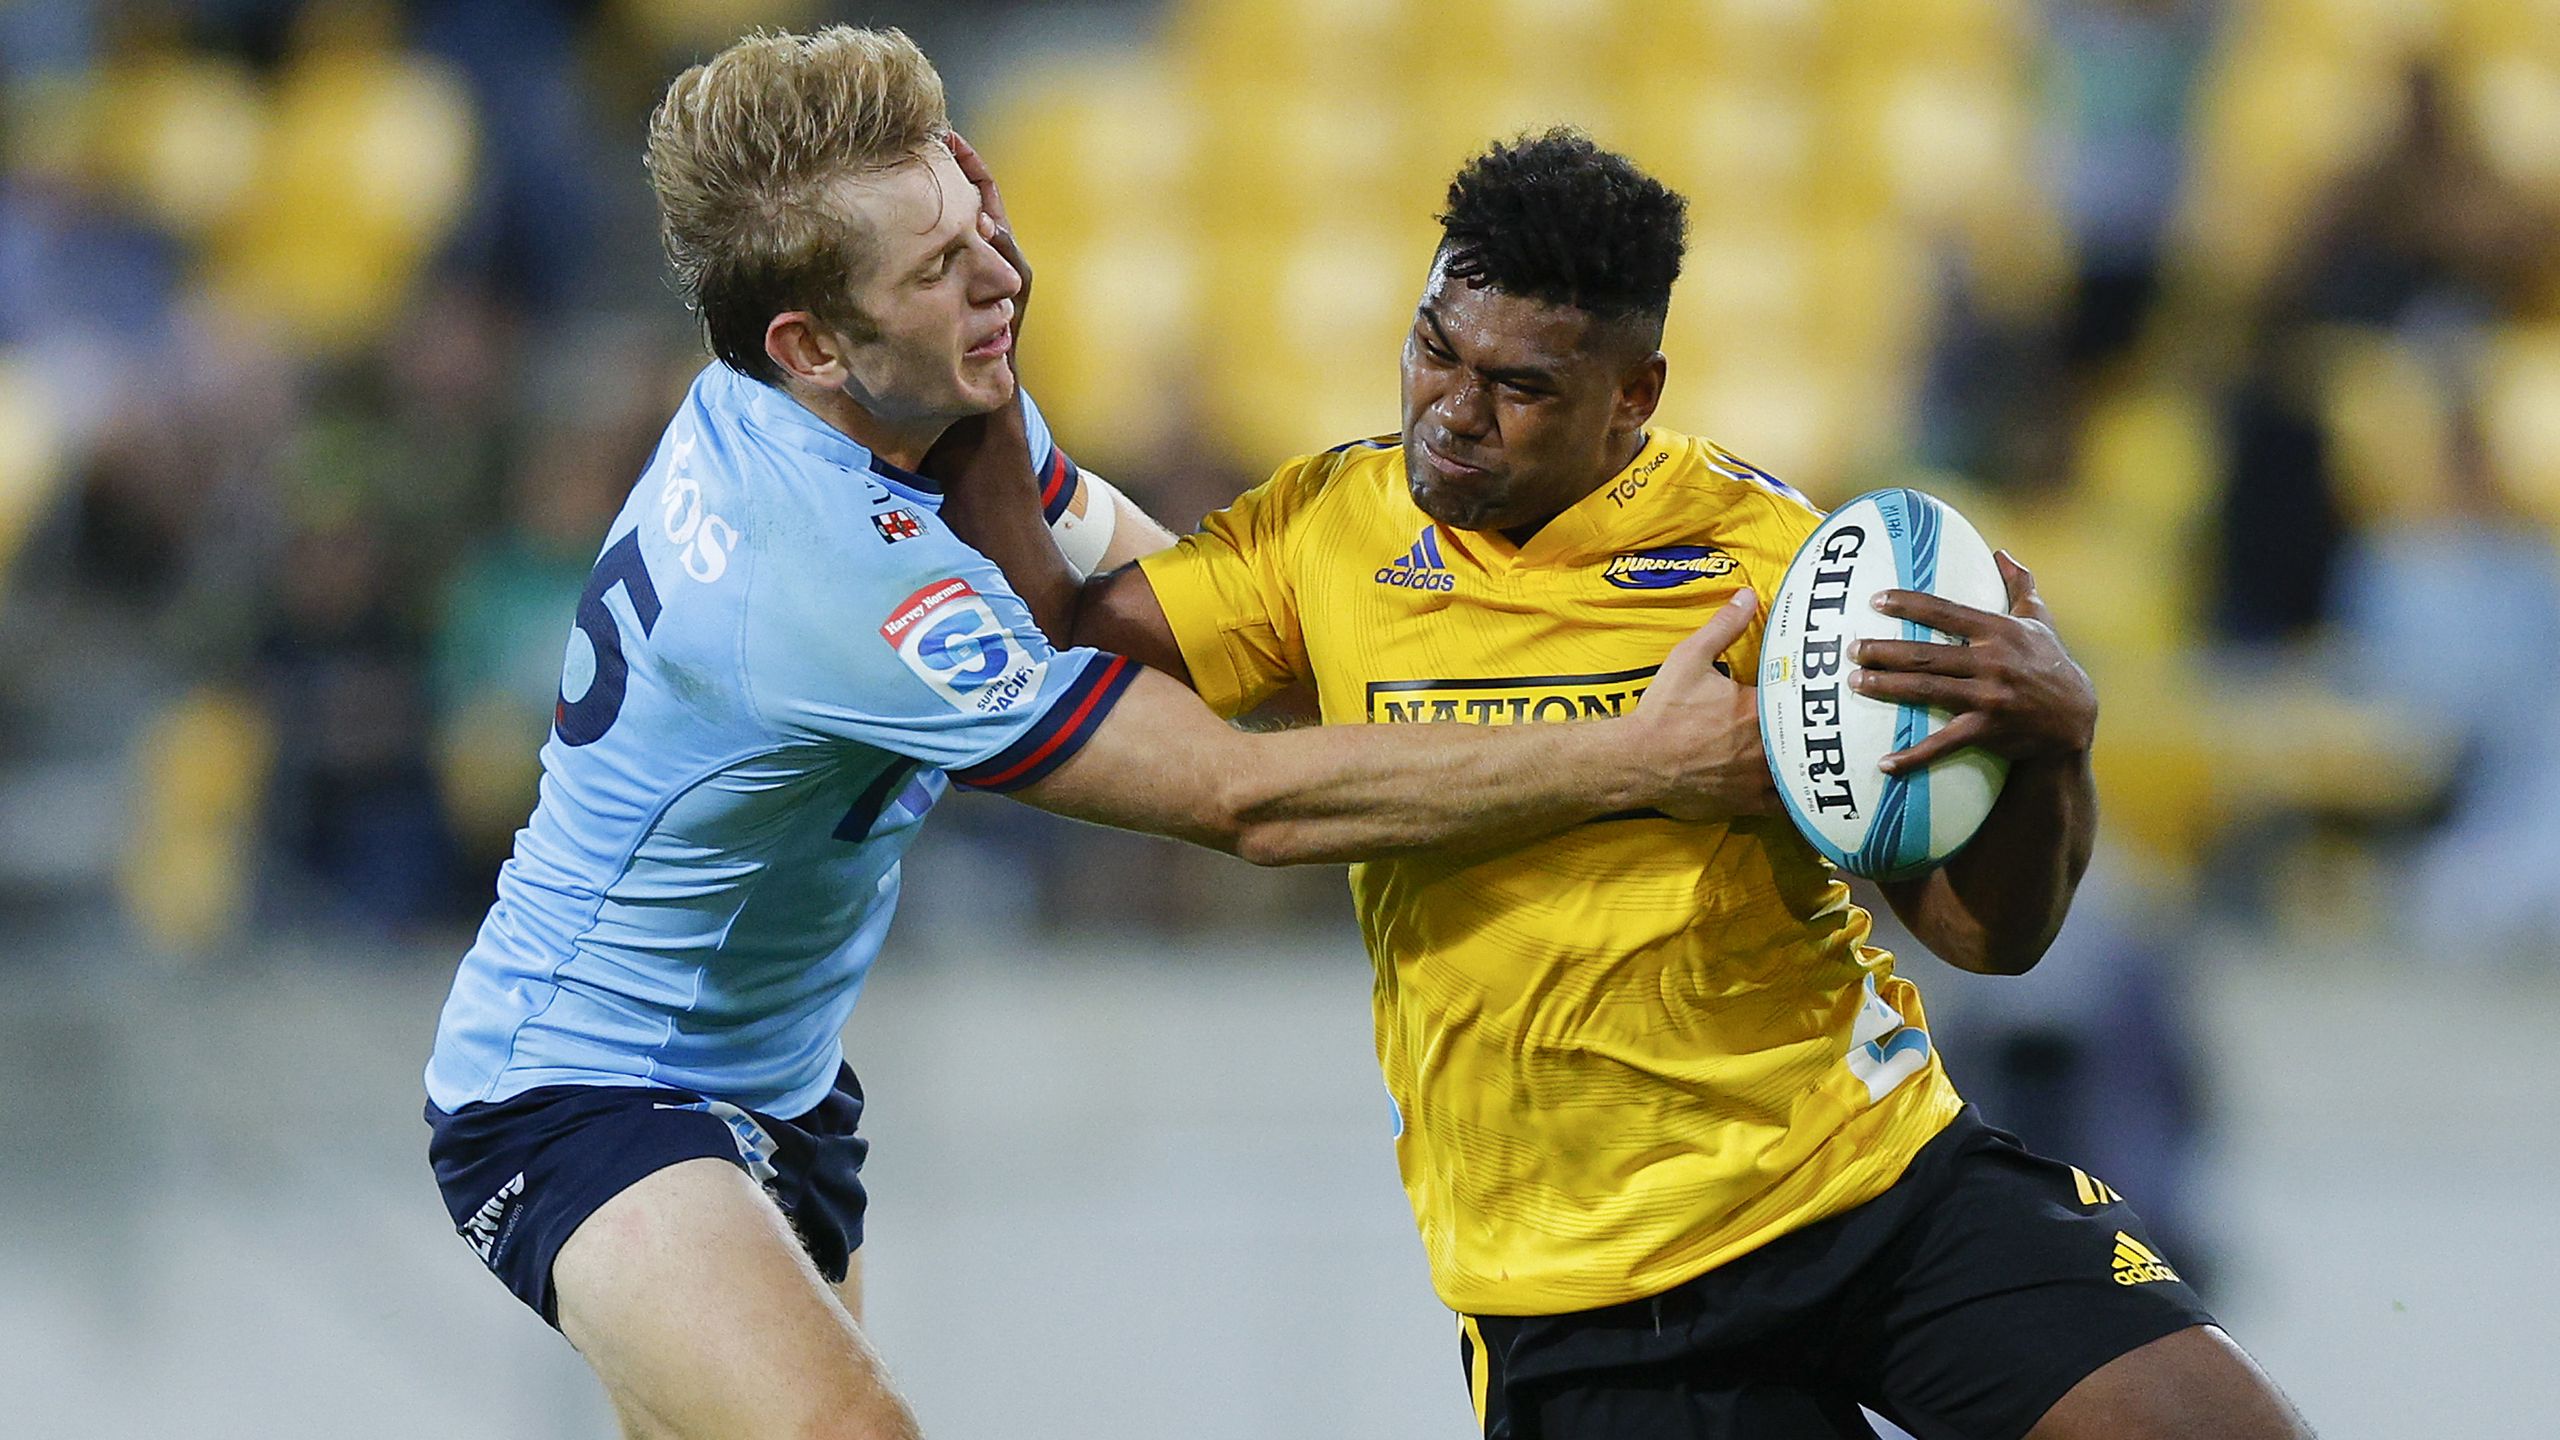 Kini Naholo of the Hurricanes is tackled by Max Jorgensen of the Waratahs.